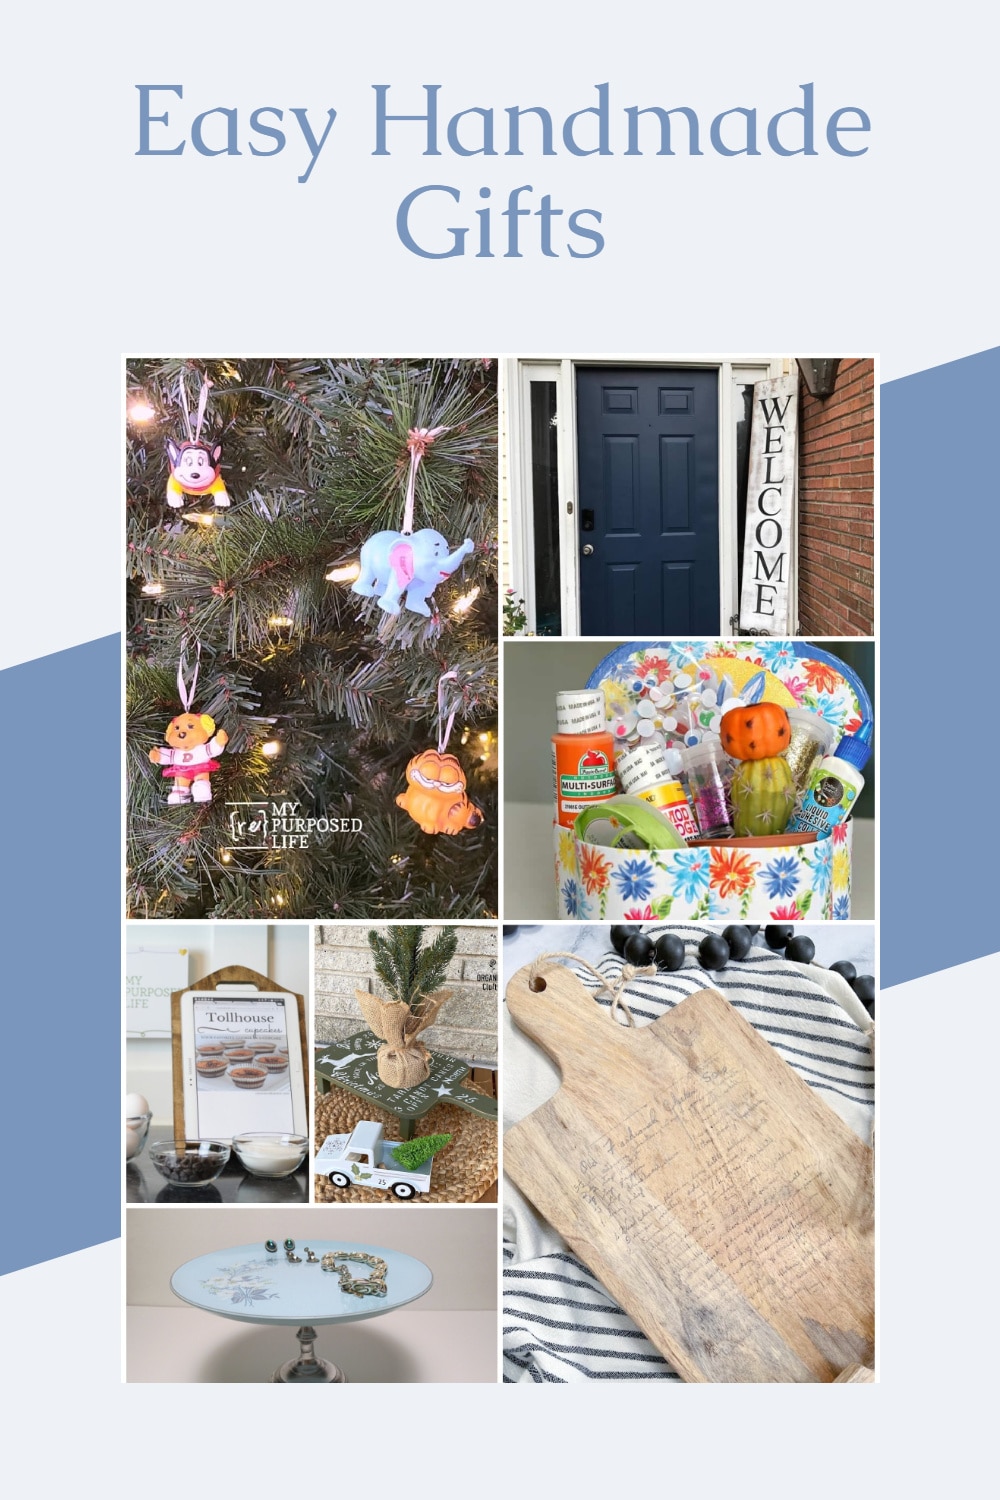 A fun collection of easy handmade gift ideas to use as hostess gifts, neighbor gifts, and family gifts. Nearly 50 ideas to inspire your creativity and up your gift giving game. #MyRepurposedLife #giftideas via @repurposedlife